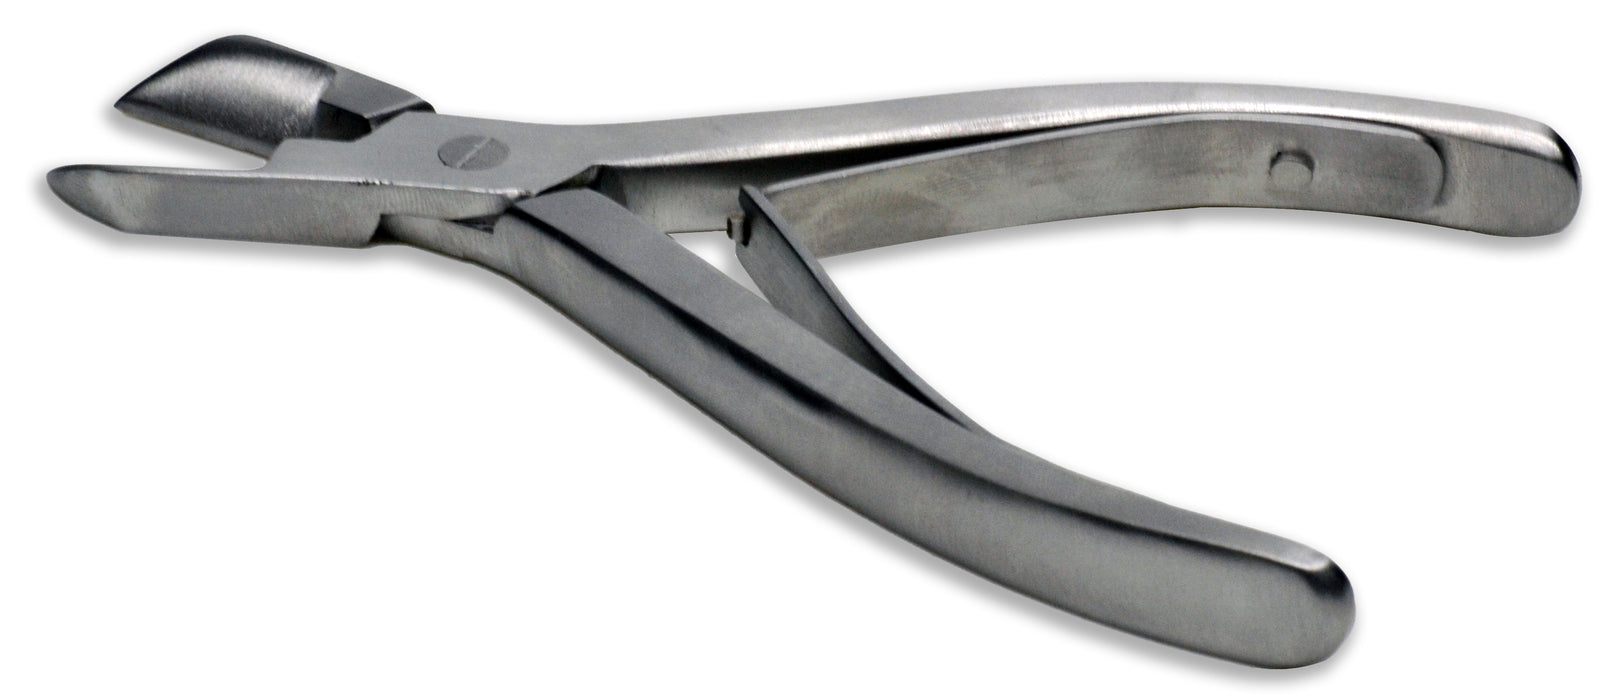 5 Inch Bone Cutting Forceps, Stainless Steel - Heavy Duty Superior Construction - With Return Spring and Locking Arm